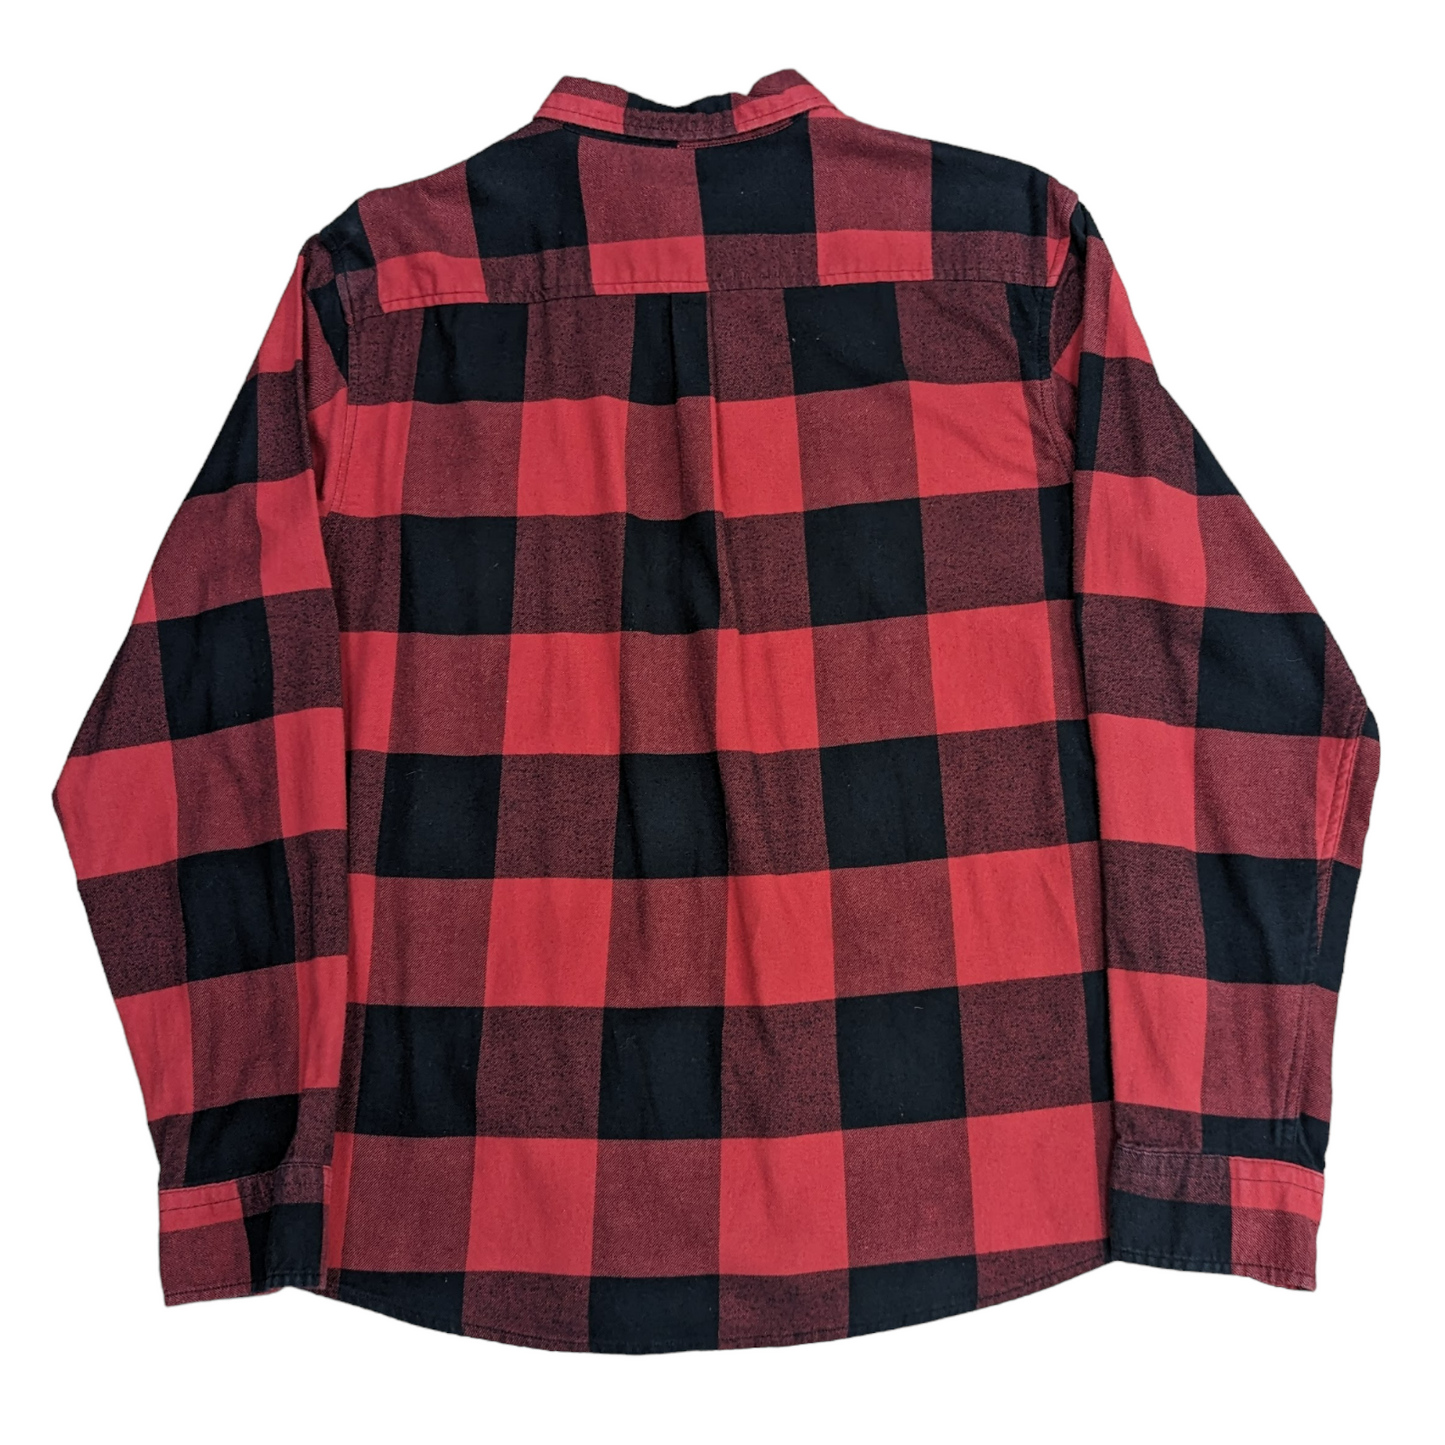 Dickies Check Flannel Shirt Shirt Size L